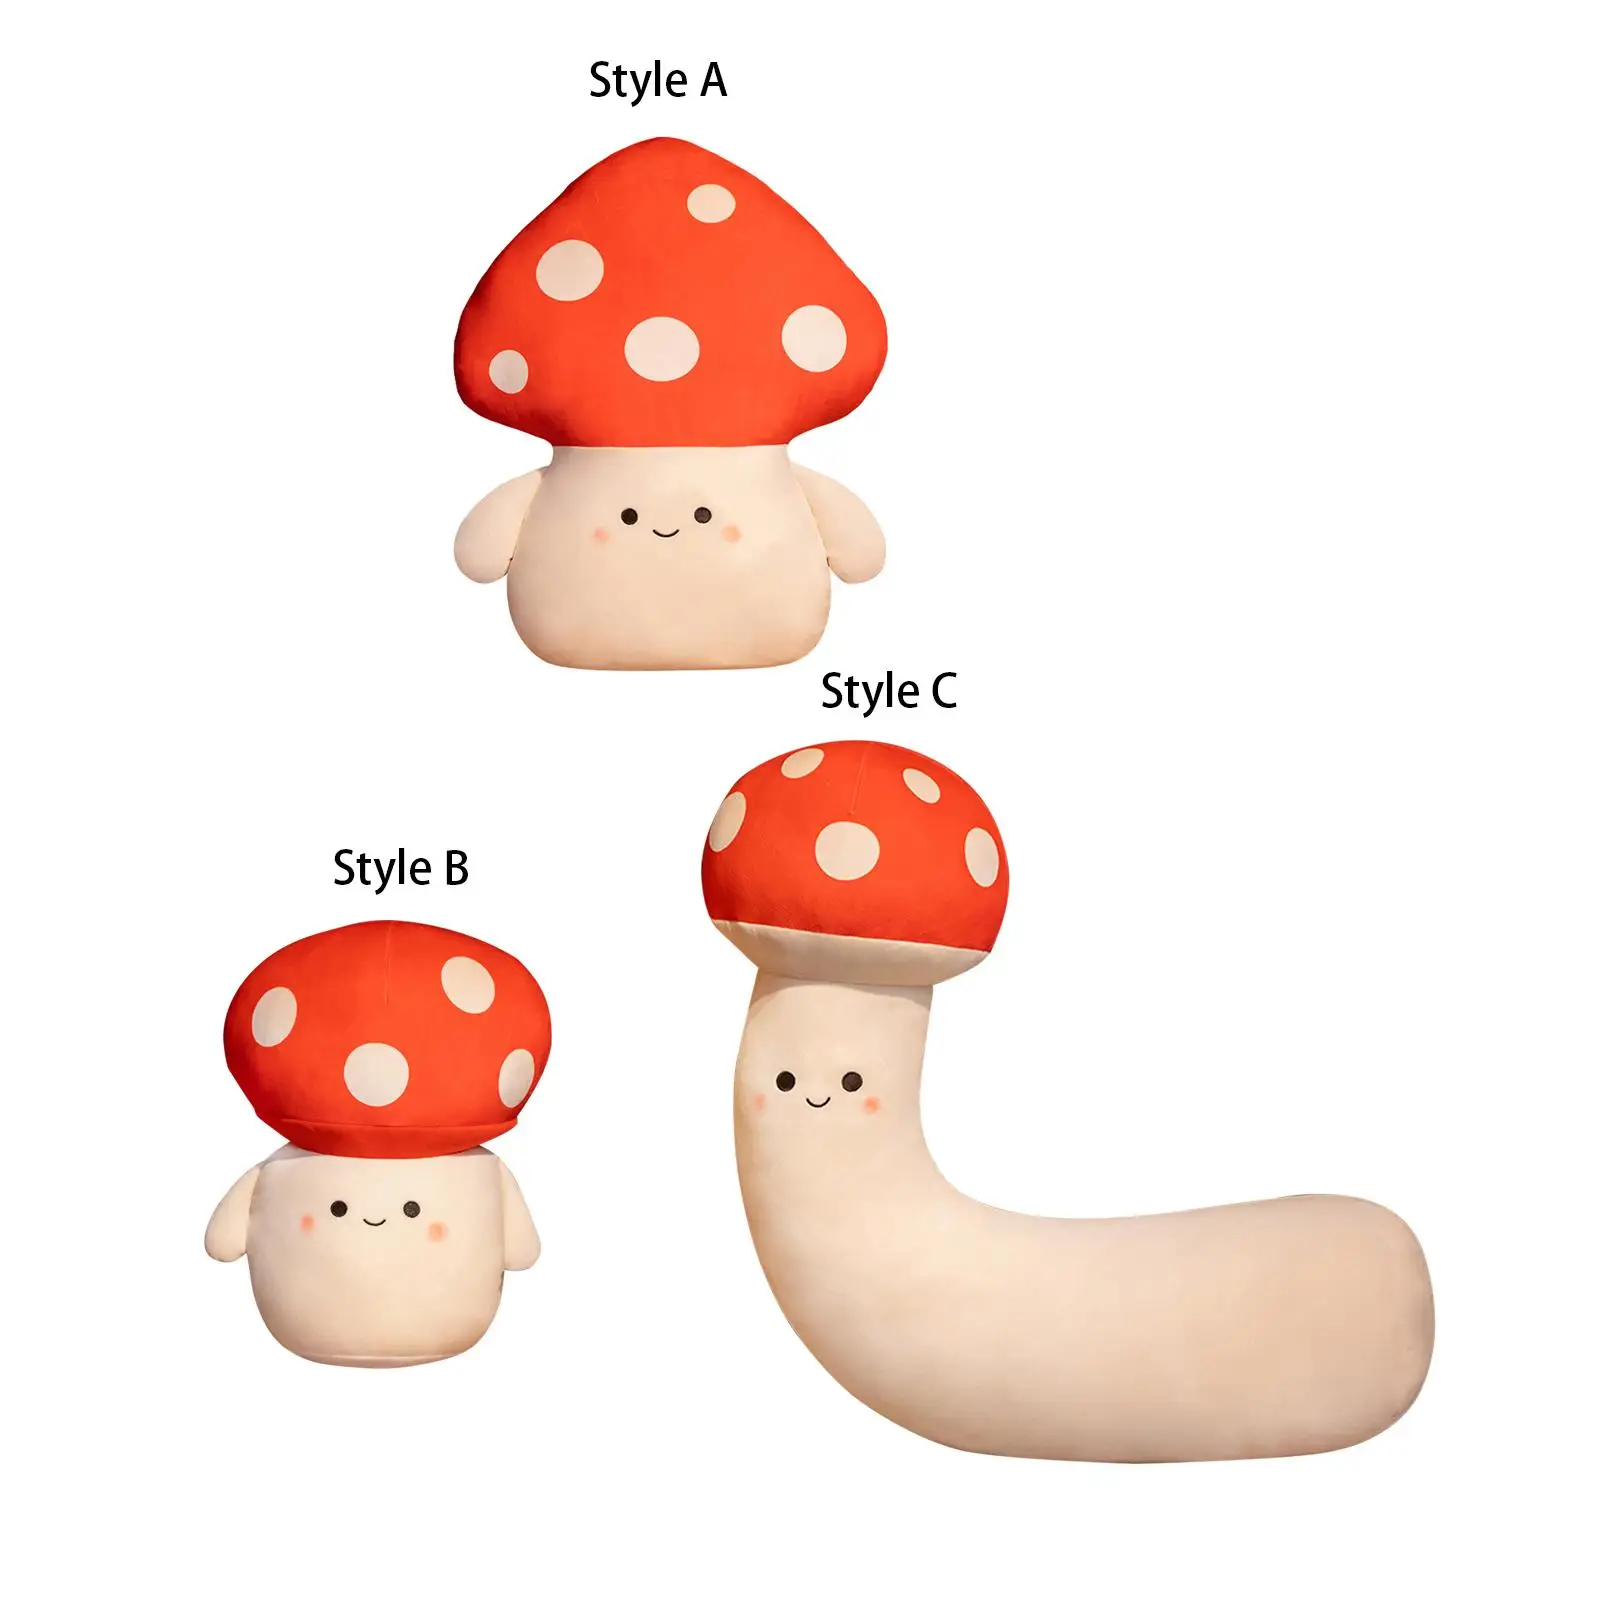 Lovely Plush Mushroom Toy Ornament Soft Sleeping Accompany Toy Stuffed Plush Toy for Living Room Home Bedroom Decoration